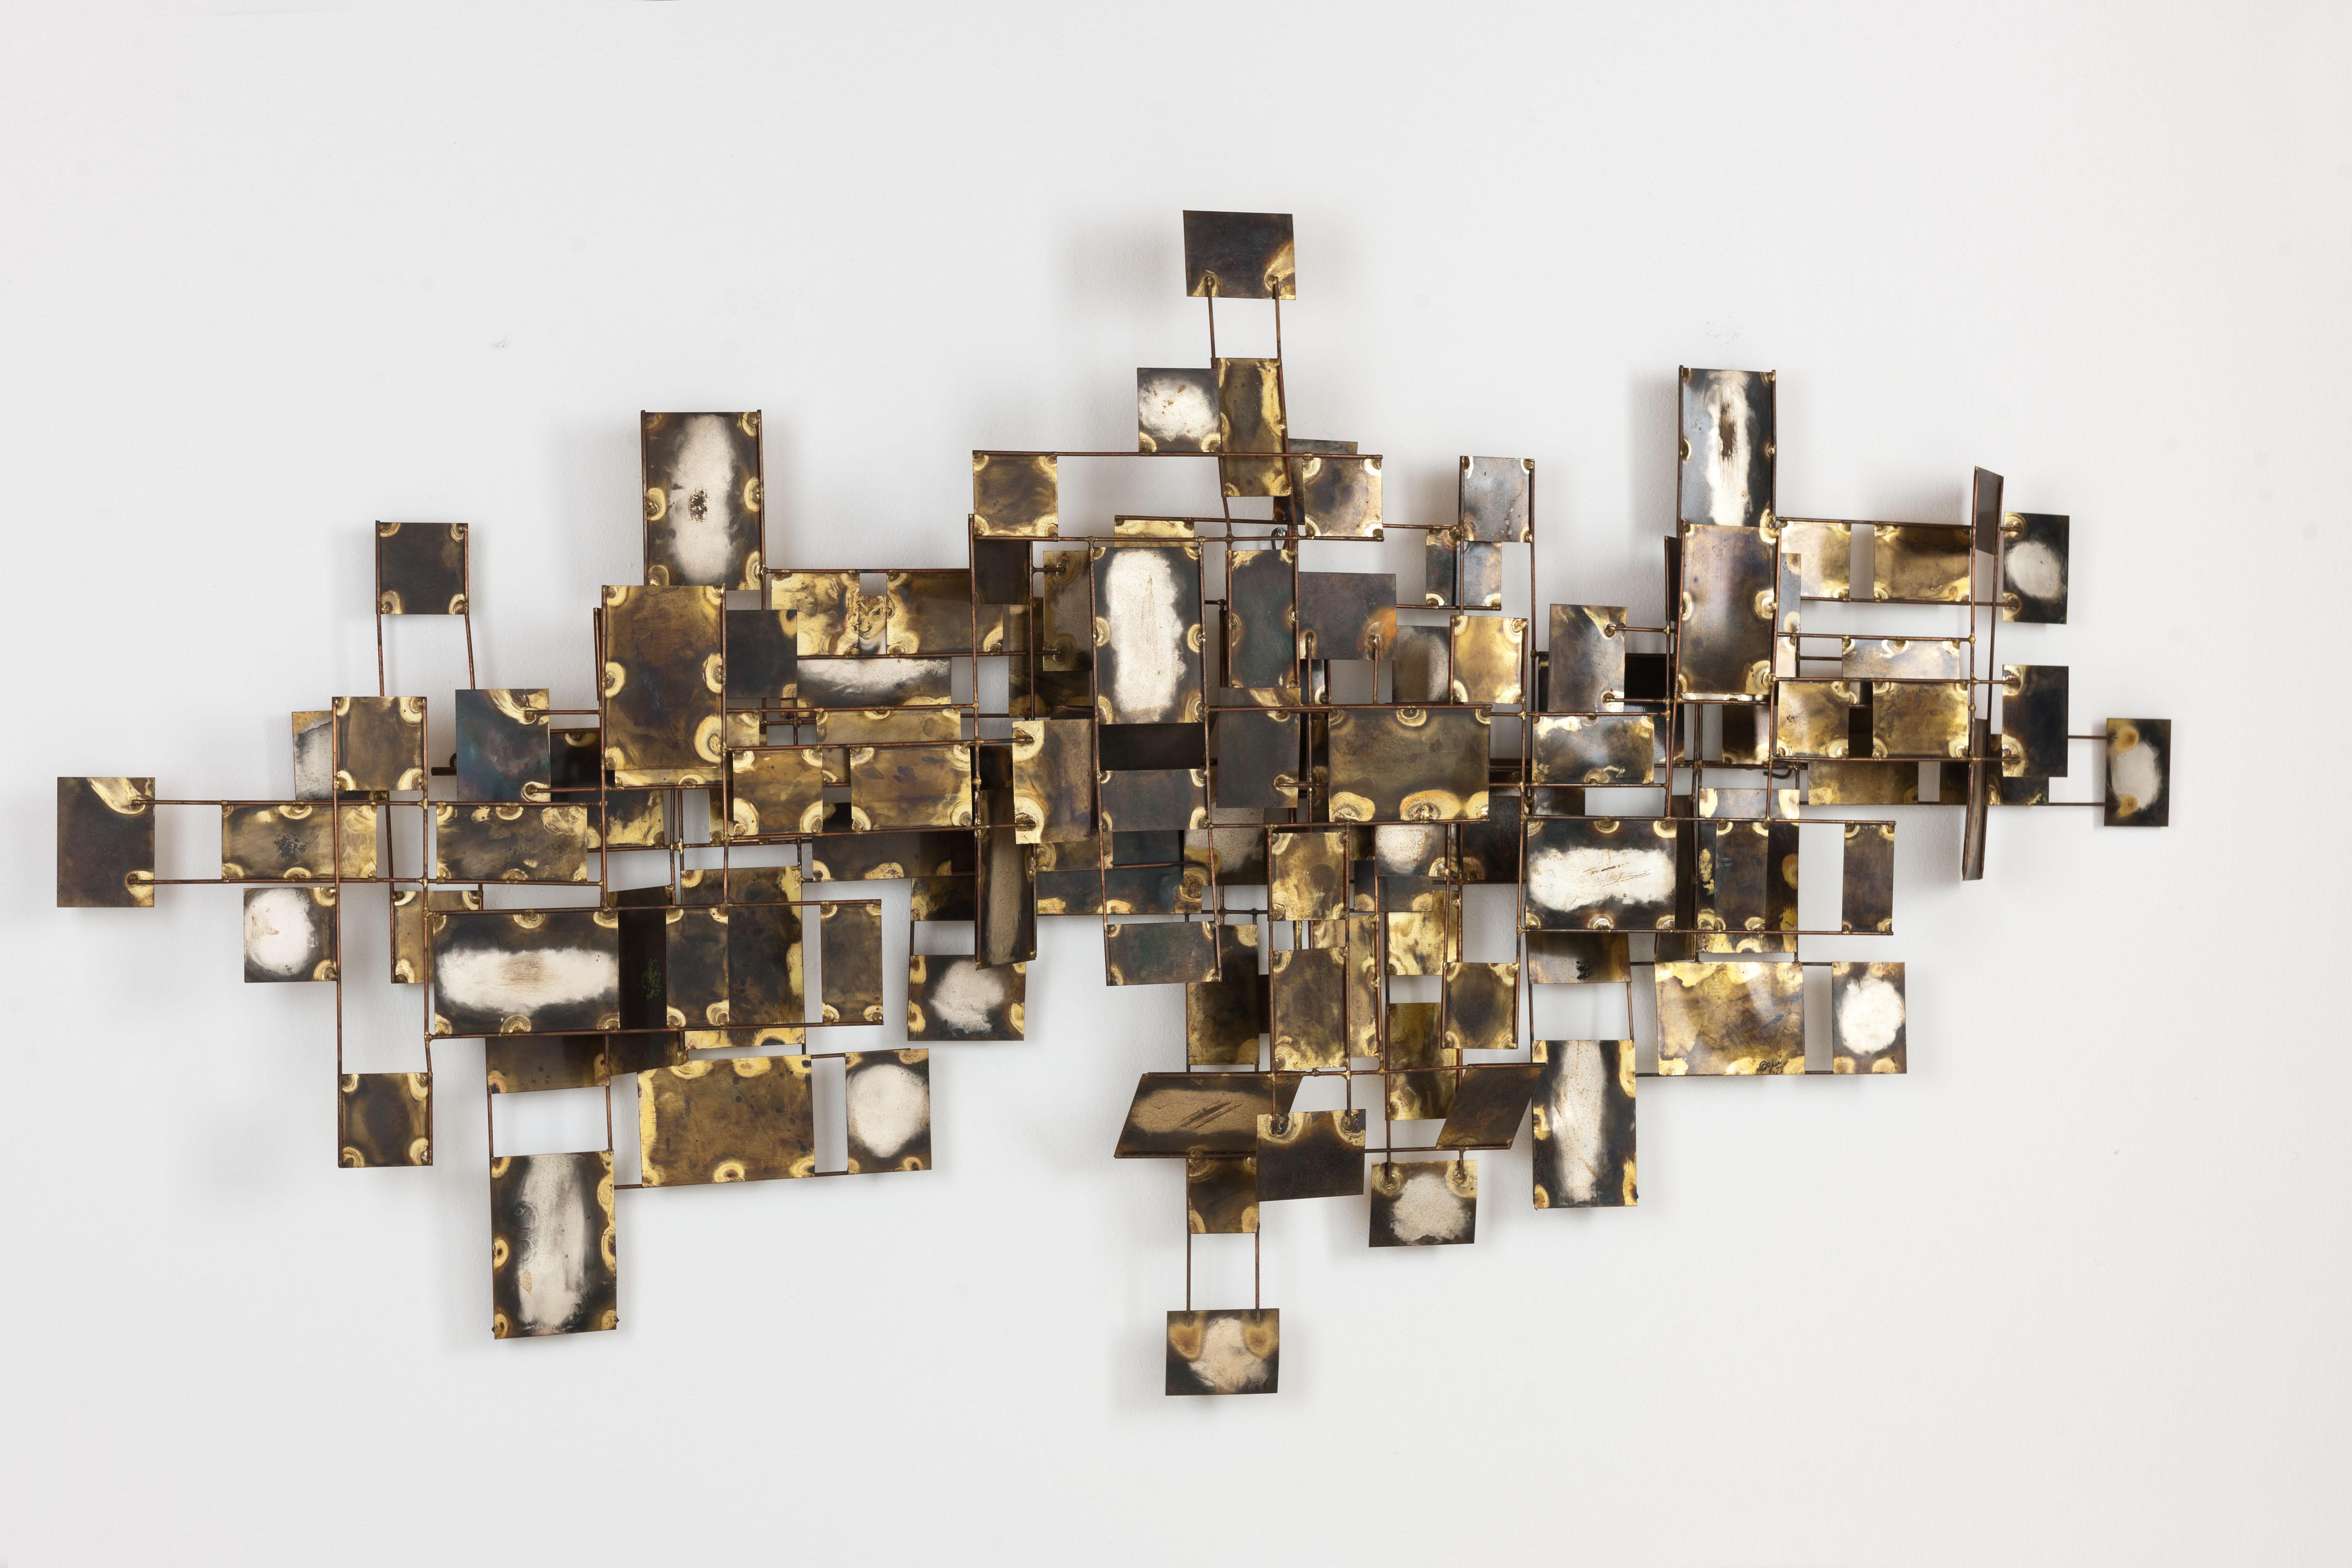 Original vintage Curtis Jere brutalist style “Labyrinth” abstract wall sculpture consisting of various metal brass elements with beautiful oxidised finishes by Artisan House. This large piece is setup to hang both horizontally and vertically on a